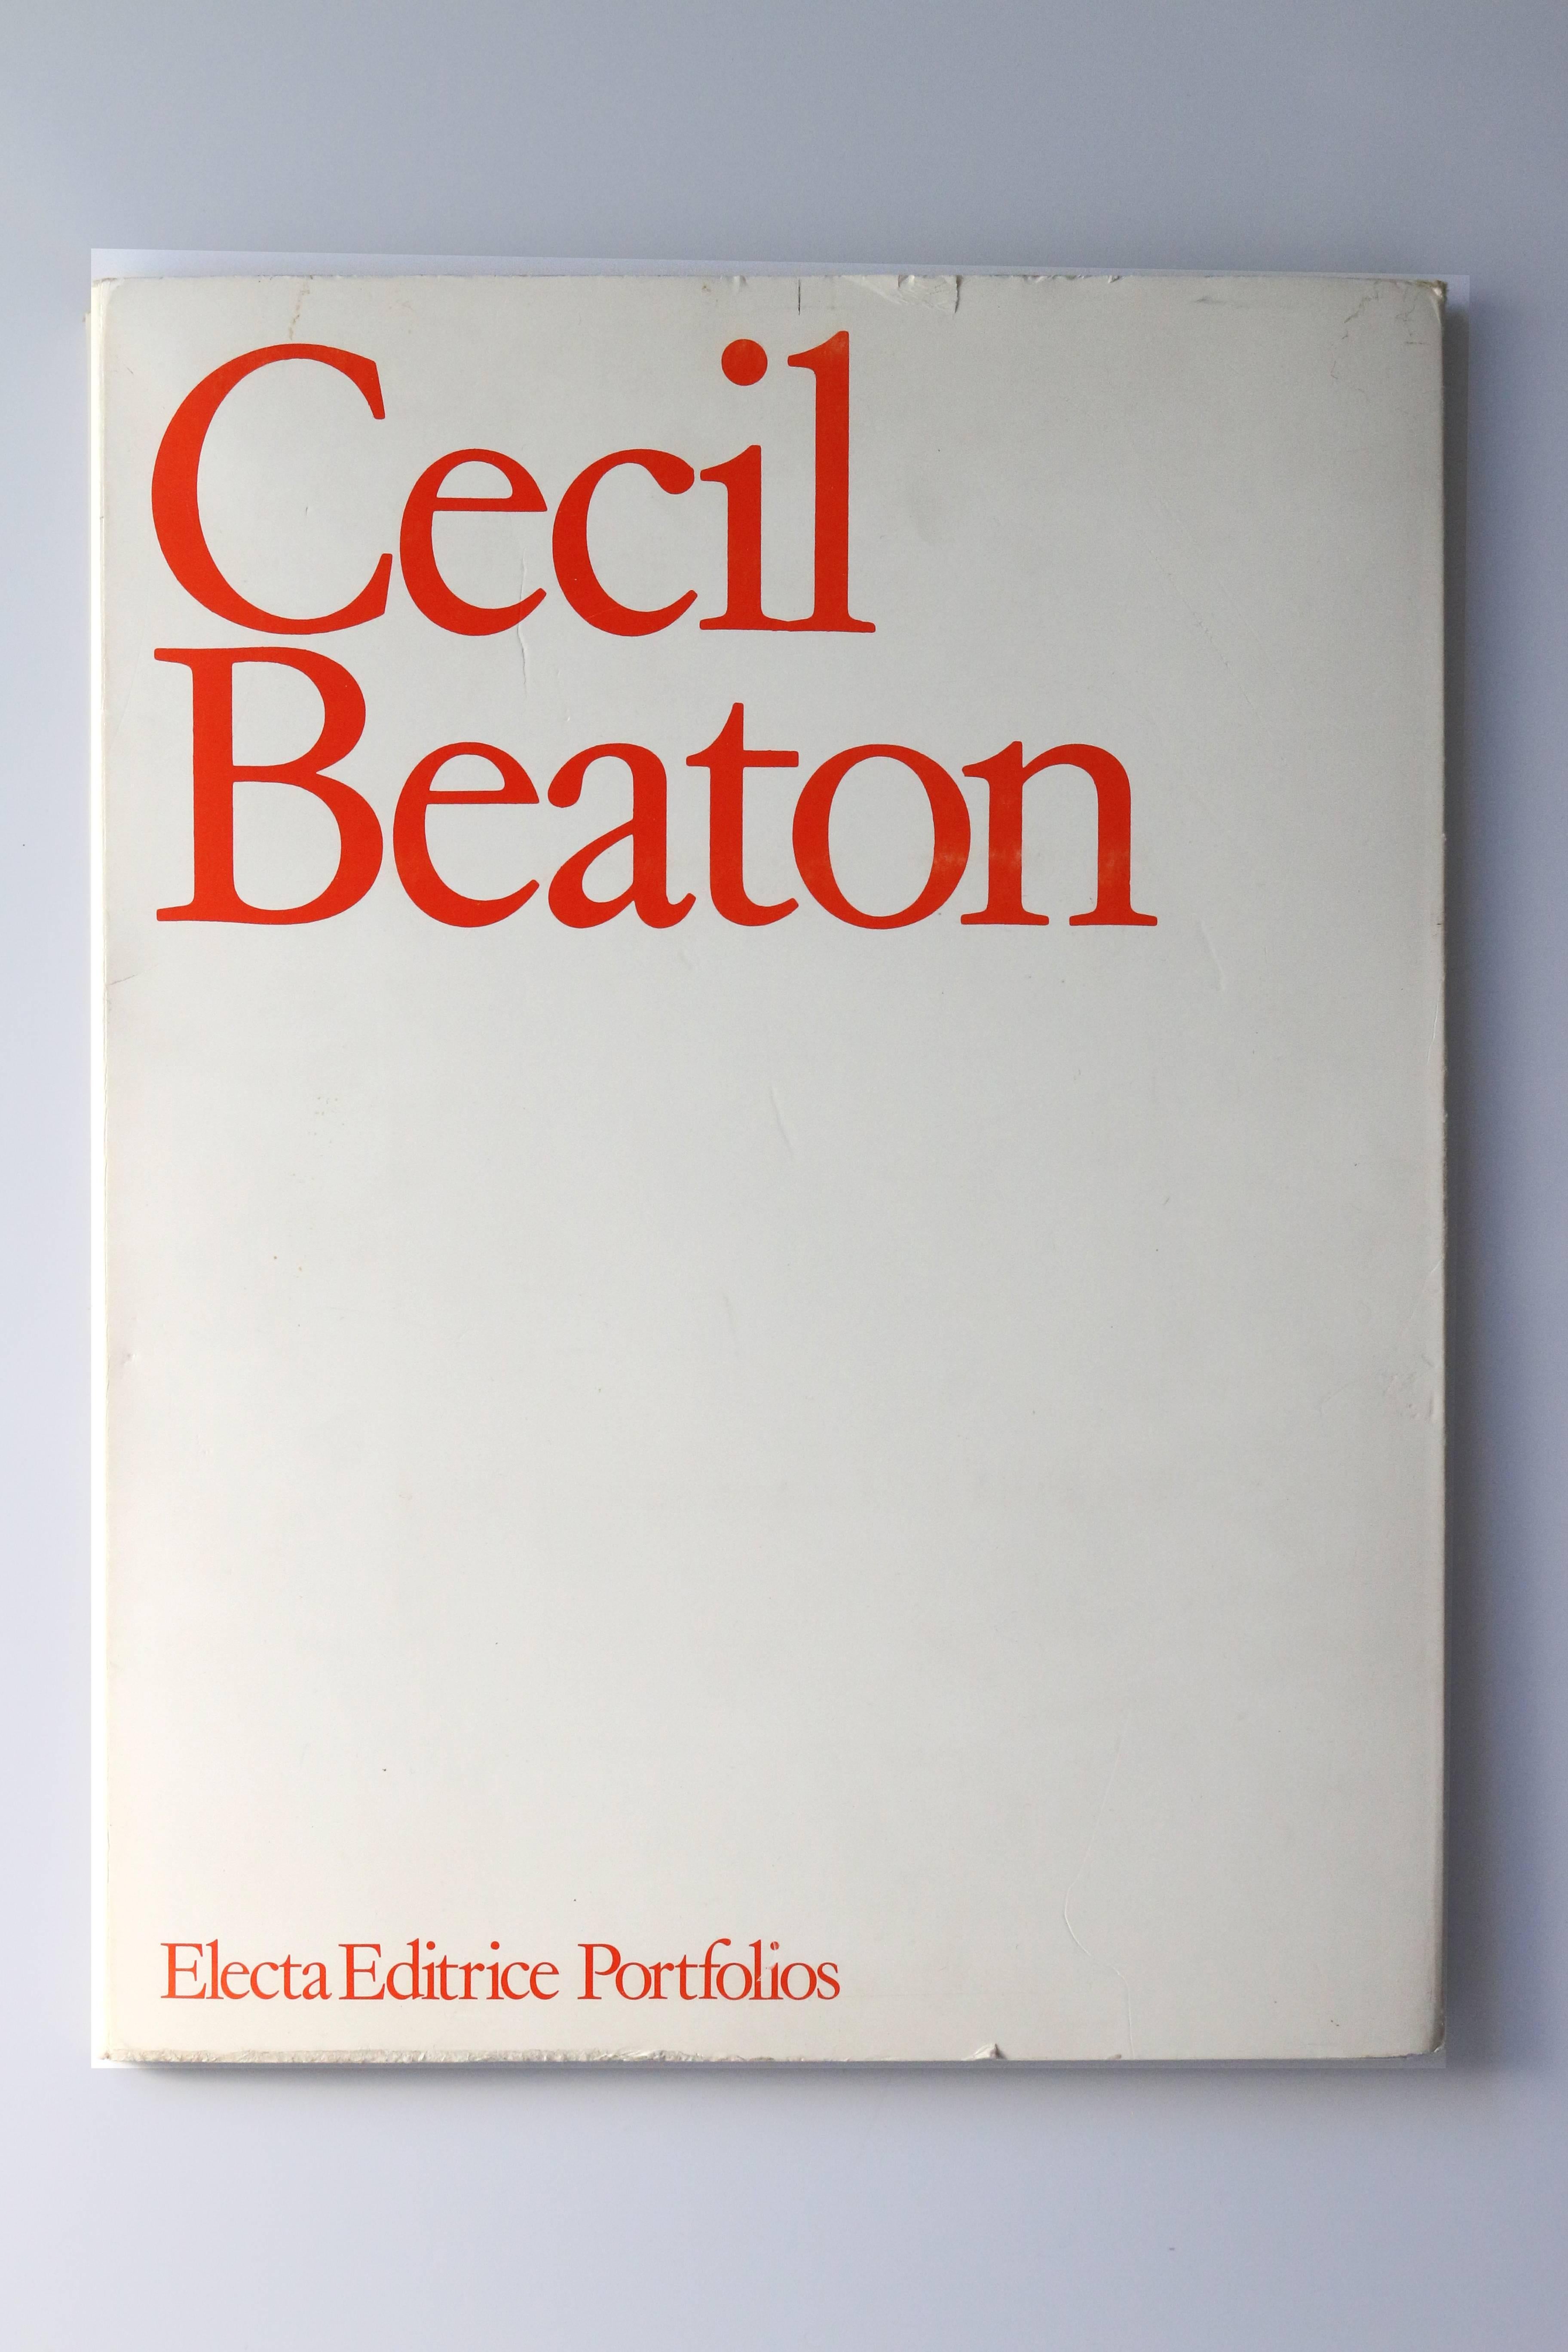 Cecil Beaton: 1904-1980 by Electa Editrice Publishers